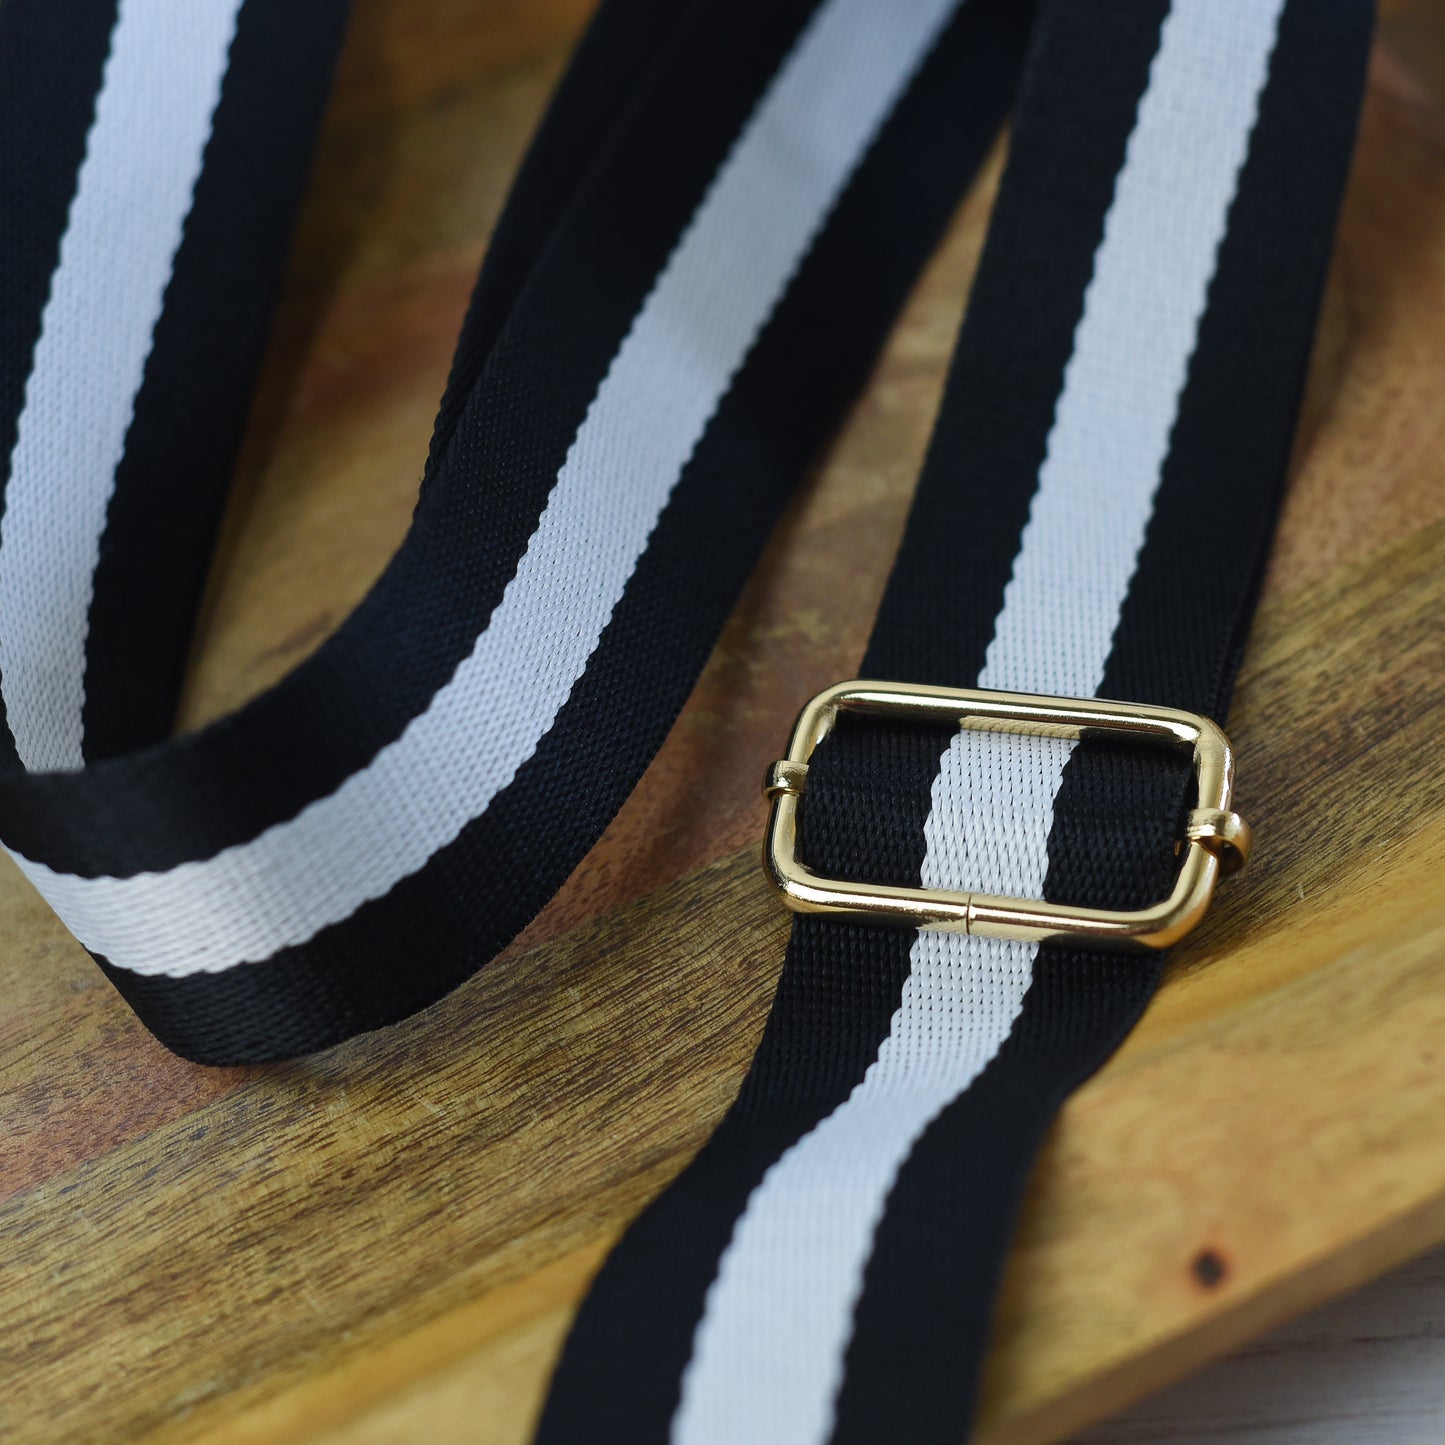 Adjustable Bag Strap 1.5 inch Striped- Black and White